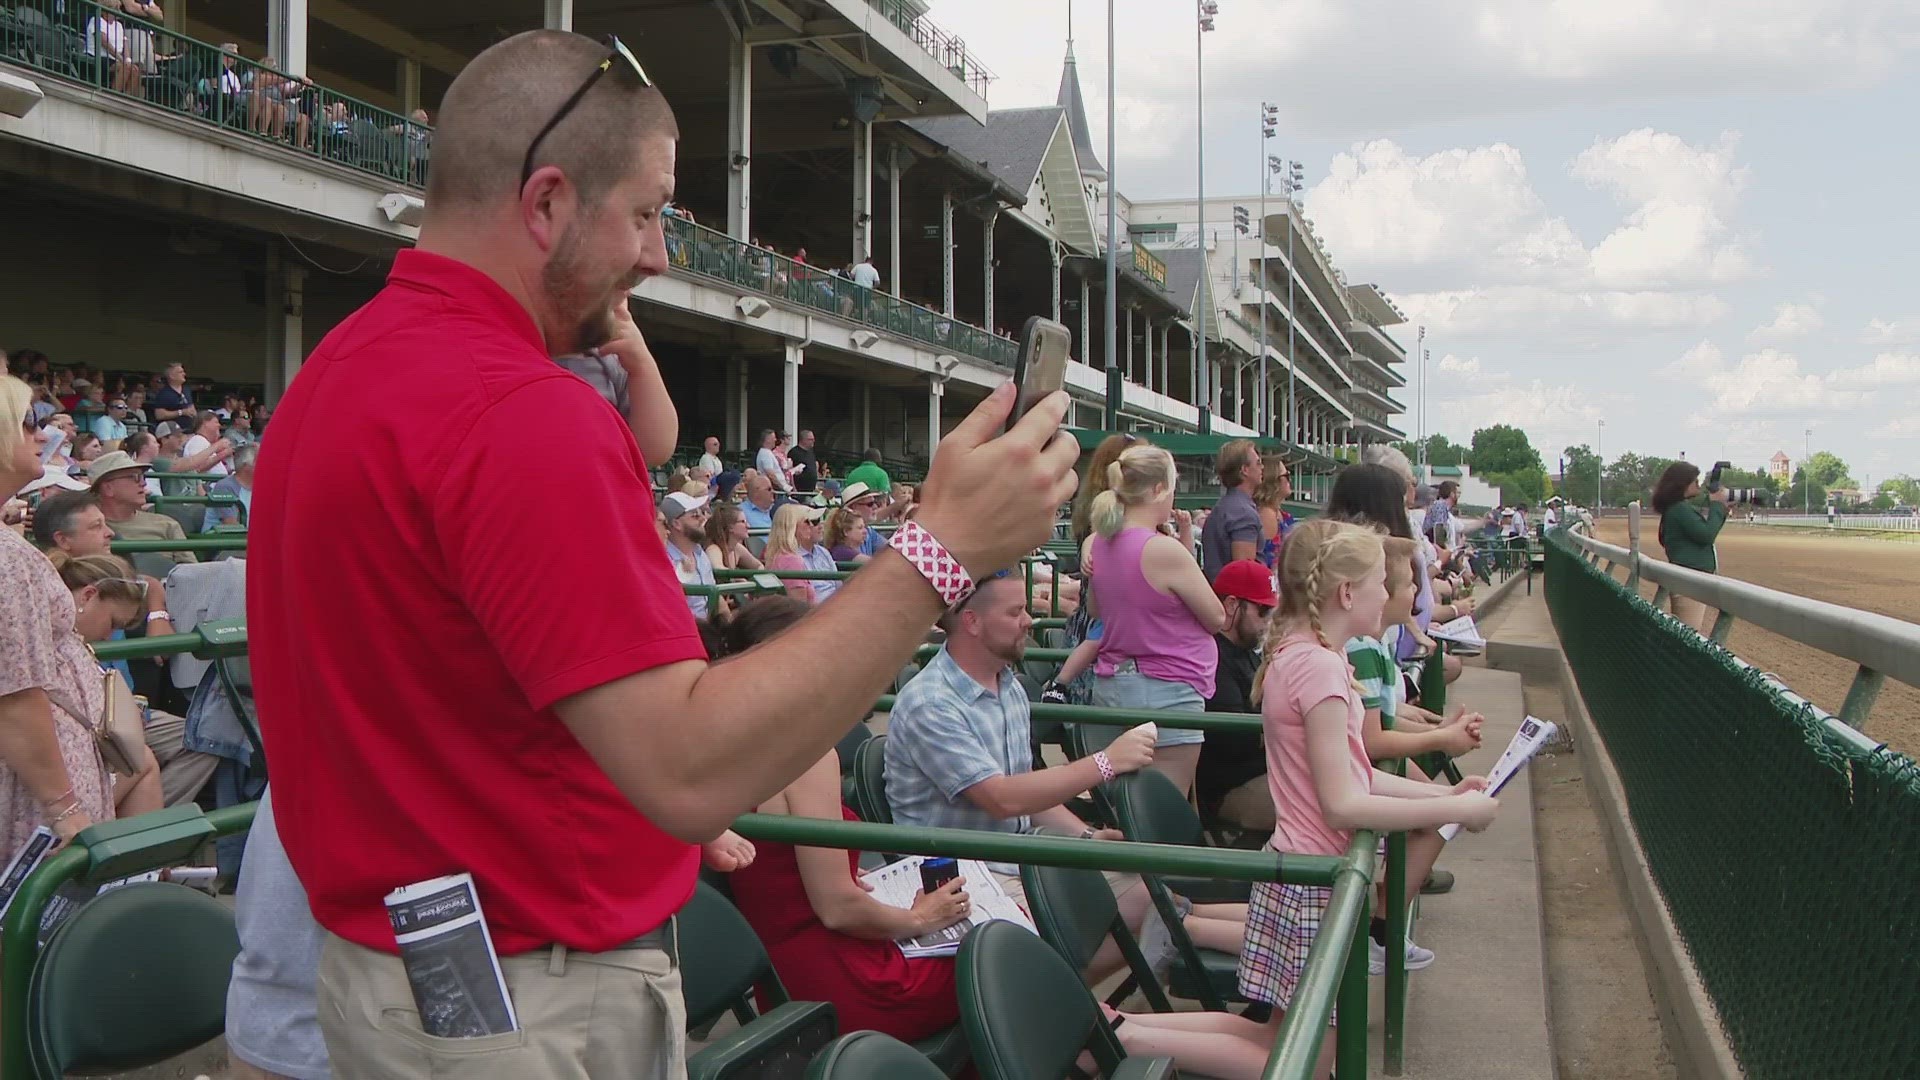 Fans gathered at Churchill Downs for twilight racing, hours after the safety initiatives were announced.